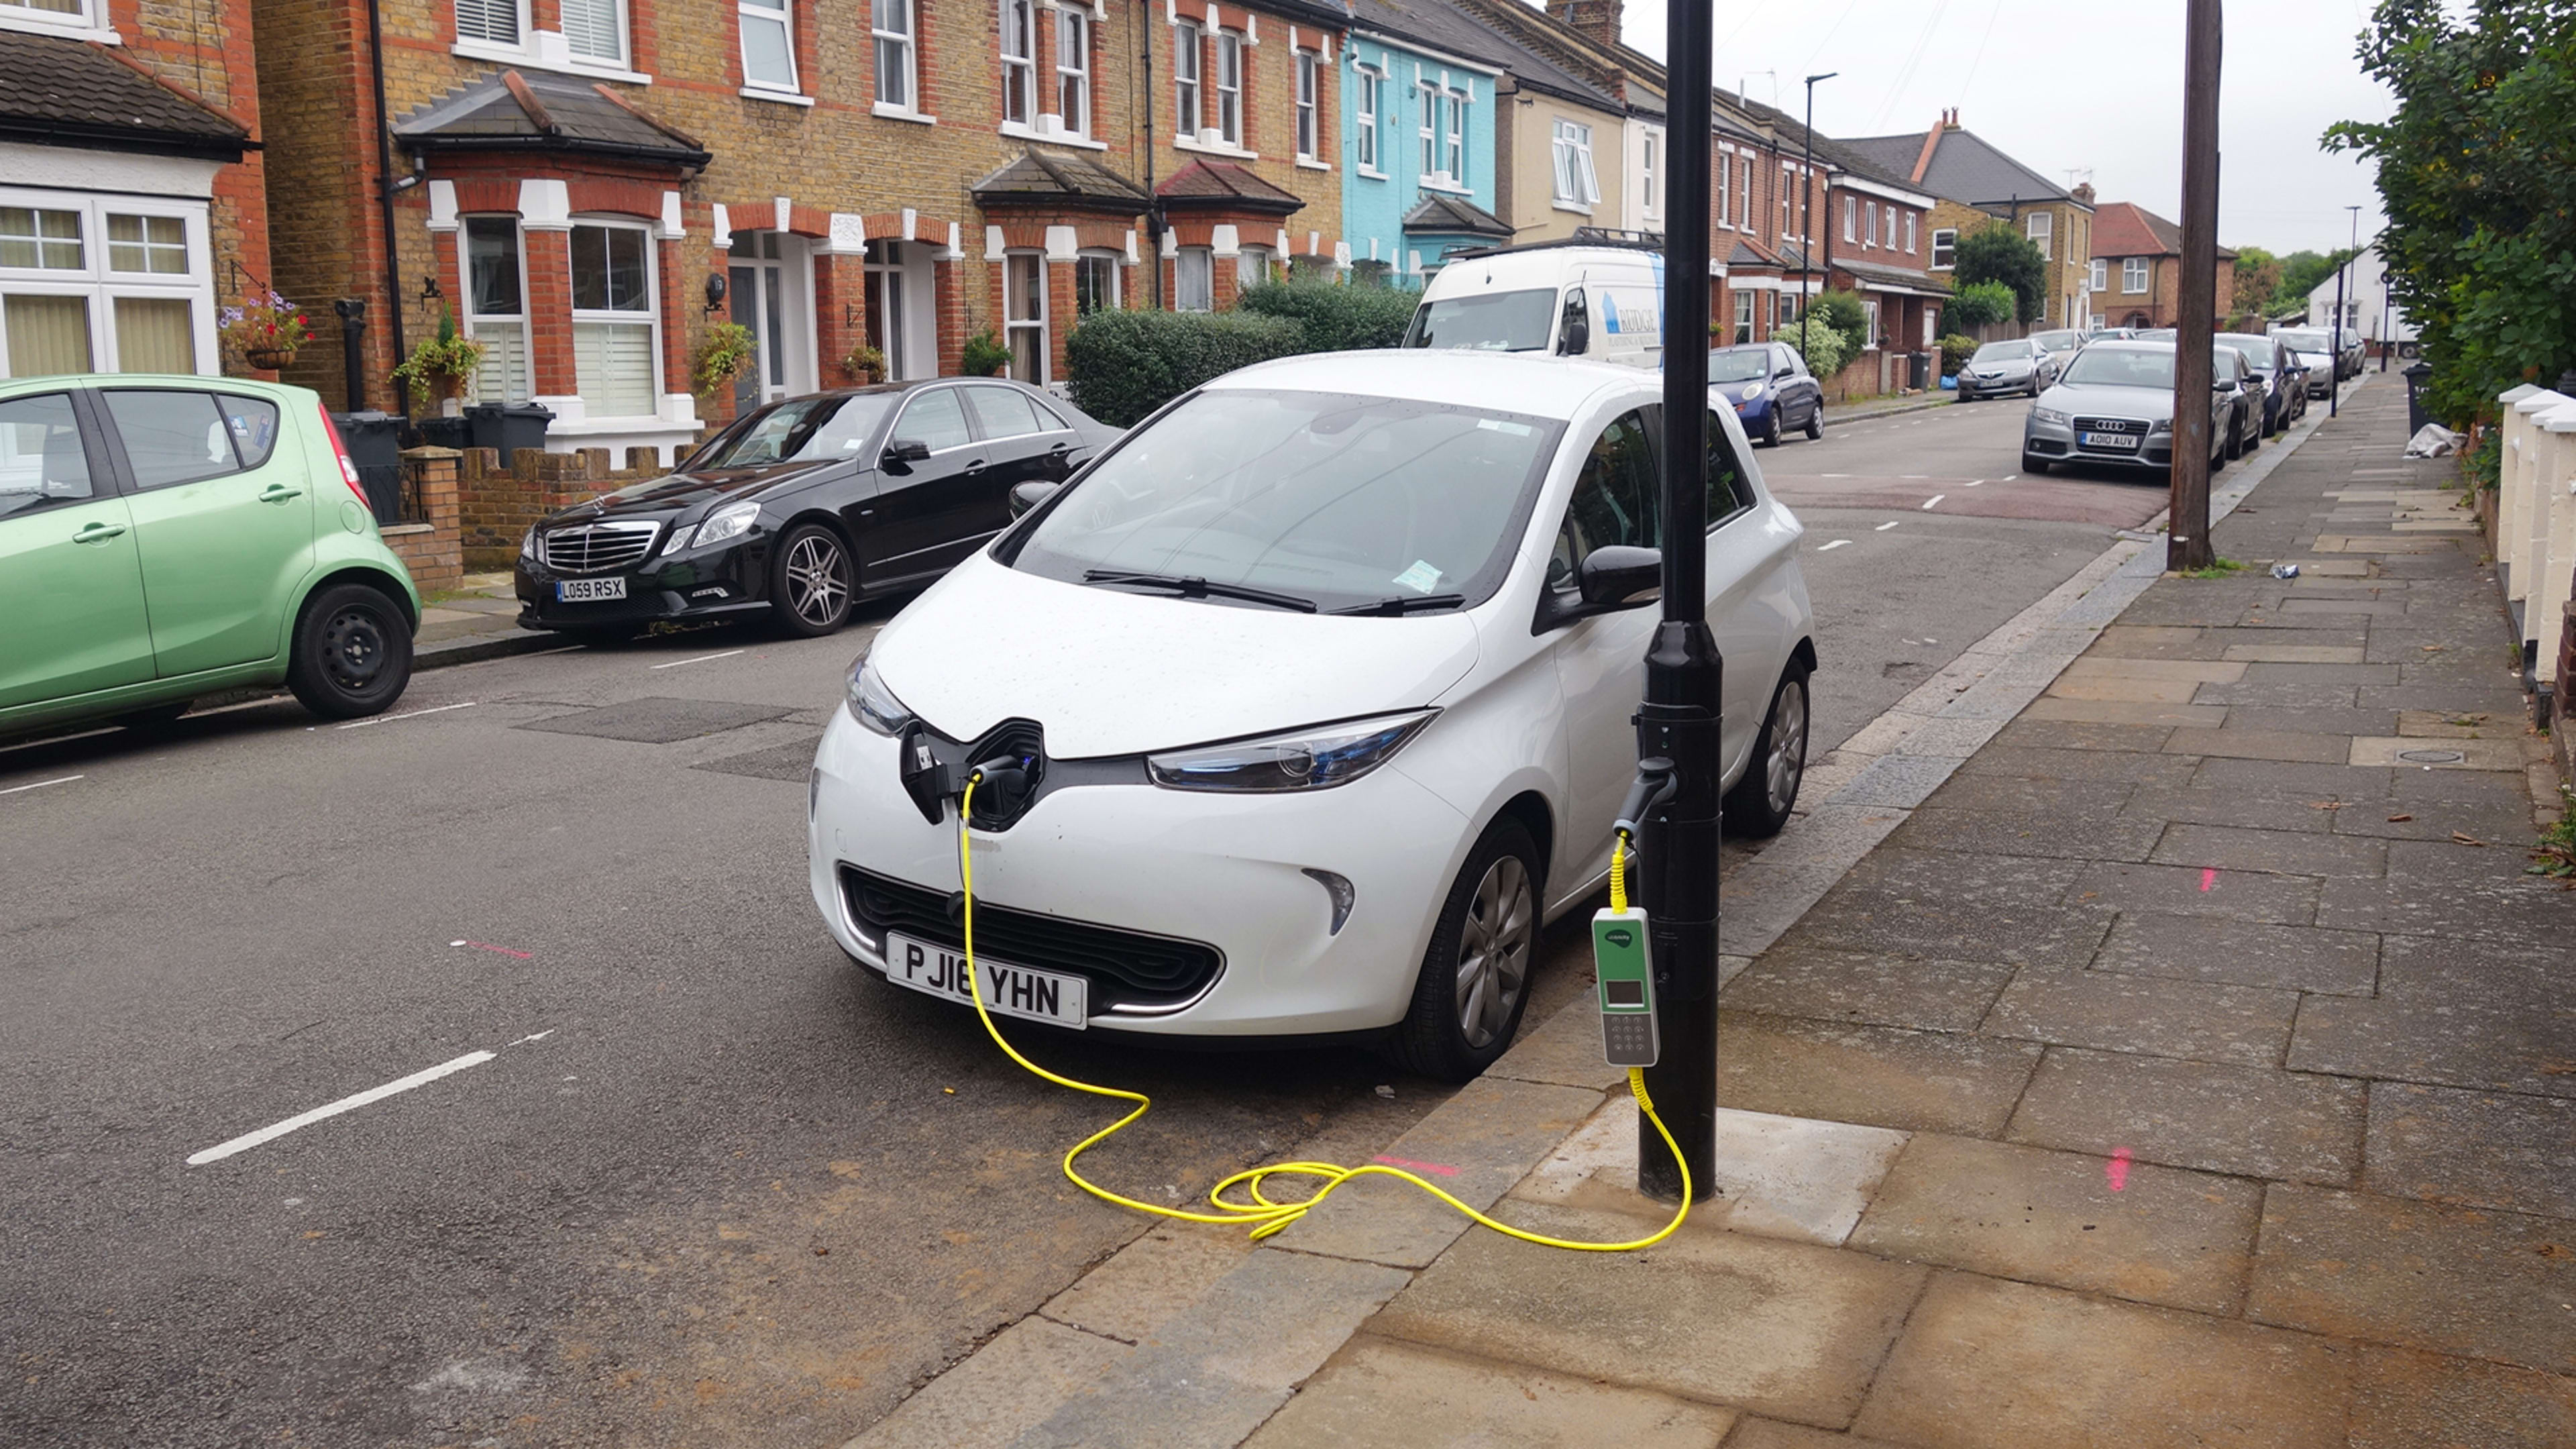 Not Everyone Has A Garage, But What If The Streetlights Were Electric Car Charging Stations?